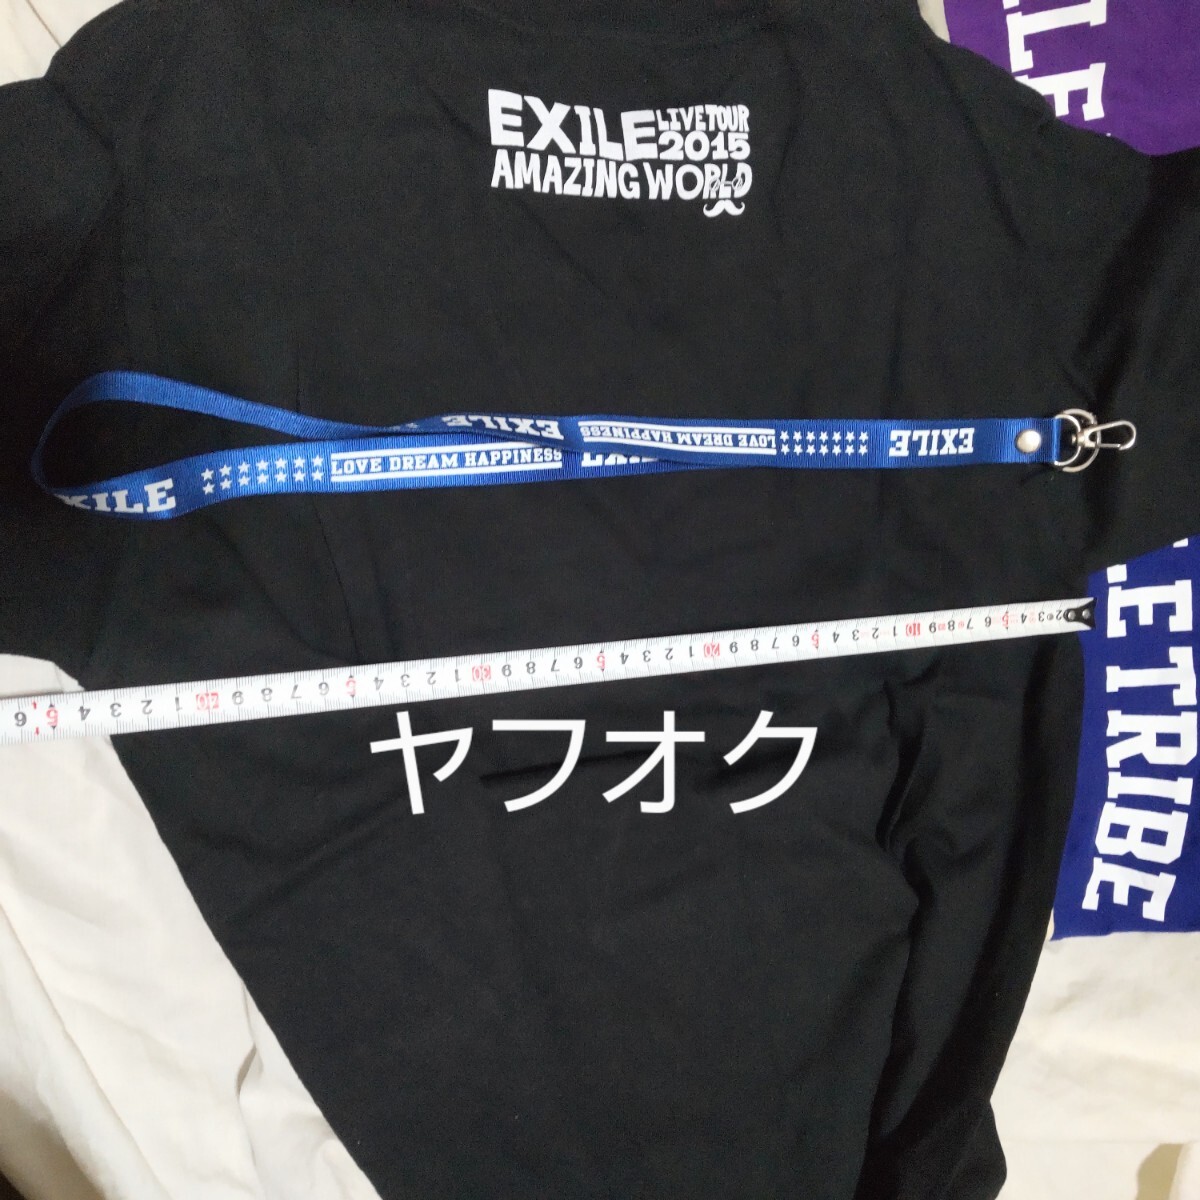 EXILE ネックストラップ、EXILE TRIBE PERFECT YEAR LIVE TOUR TOWER OF WISH2014、EXILE LIVE TOUR2015 AMAZING WORLD Tシャツ　等 セット_画像8